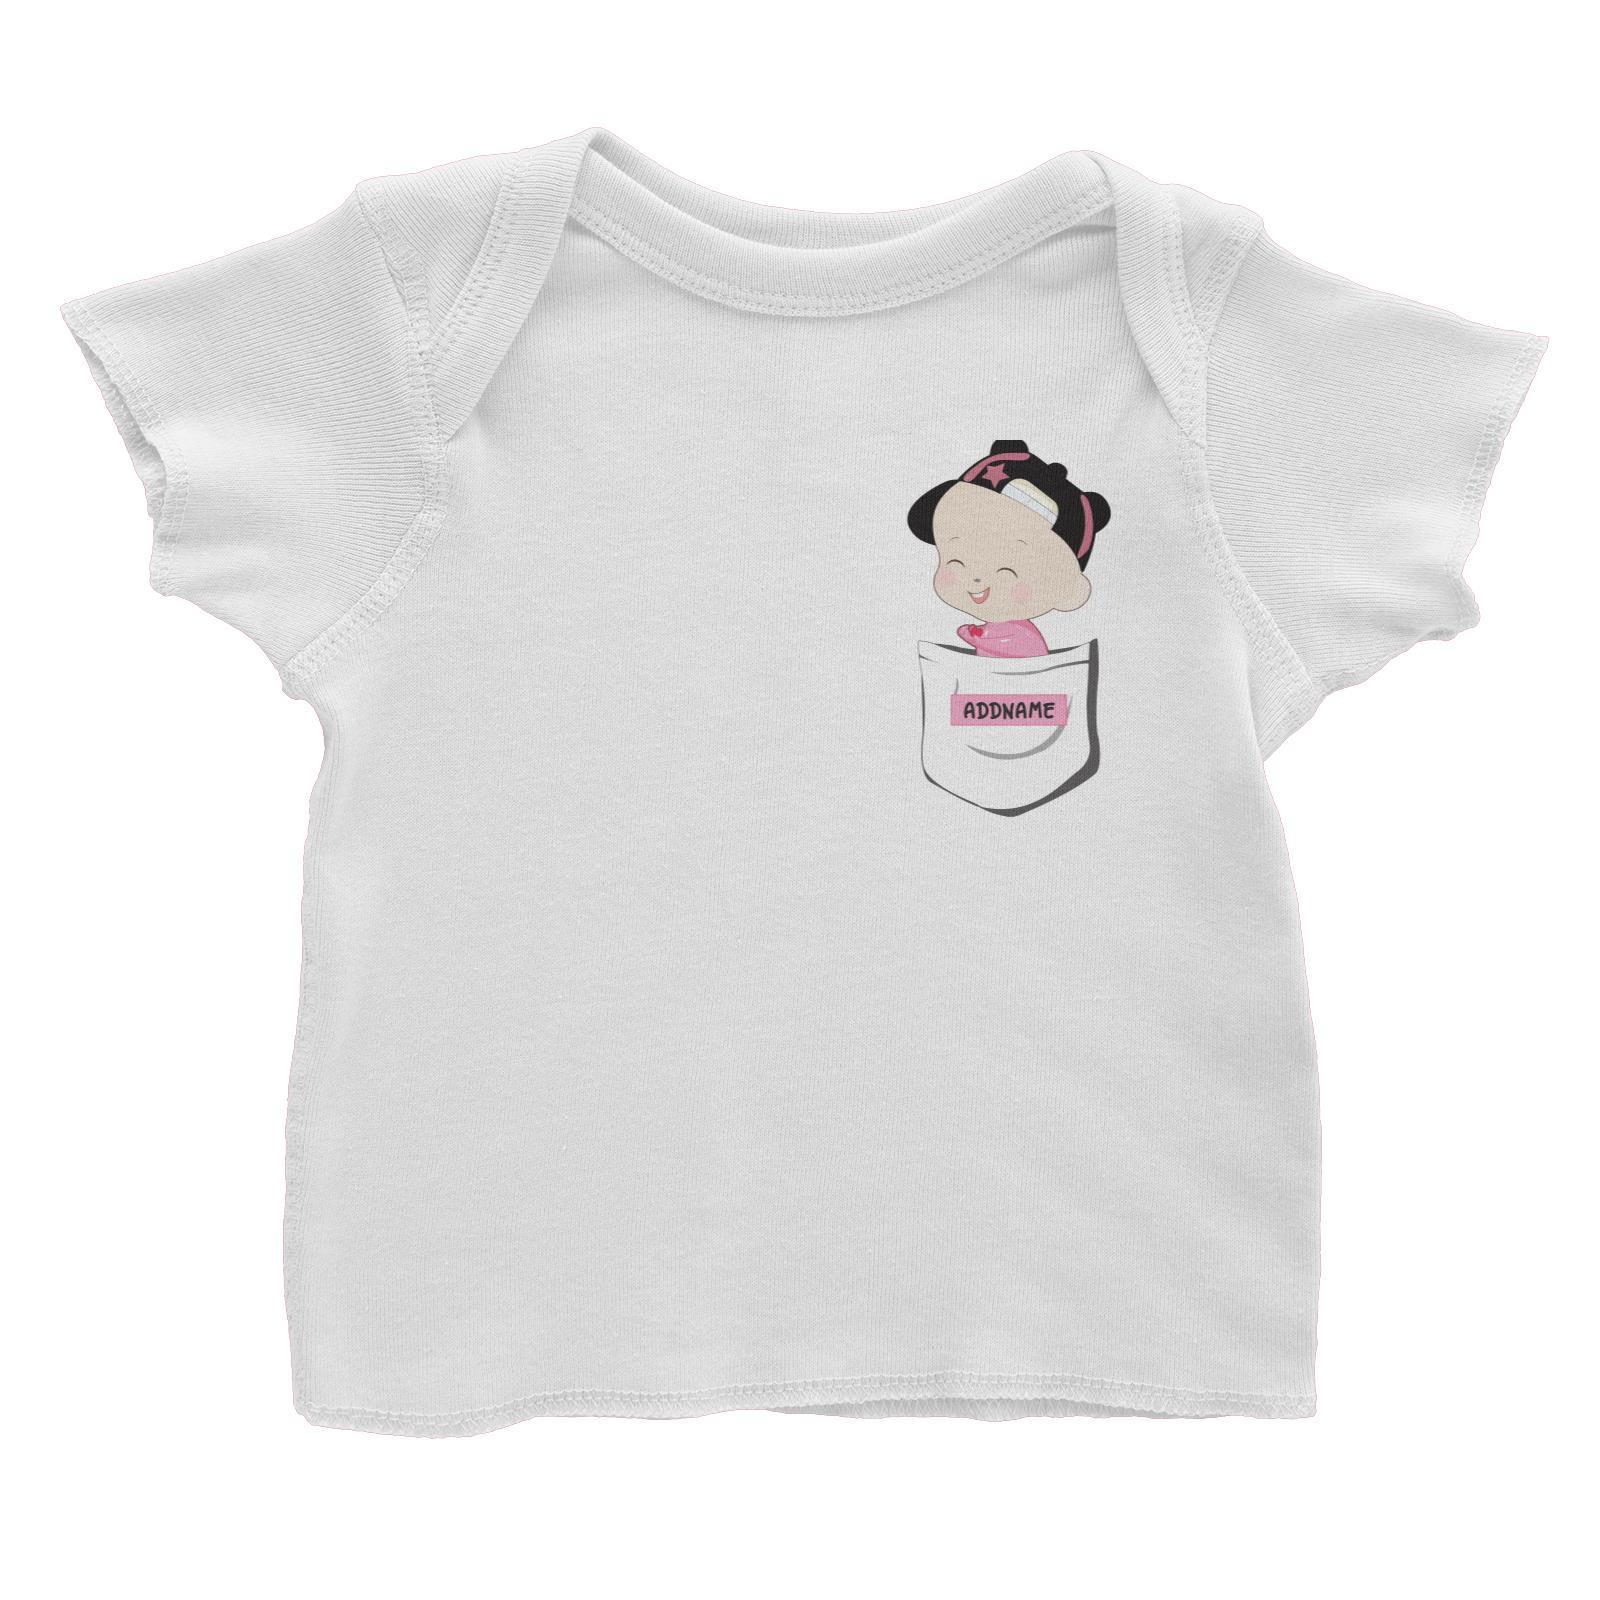 Love Family Pocket Baby Girl Addname Baby T-Shirt